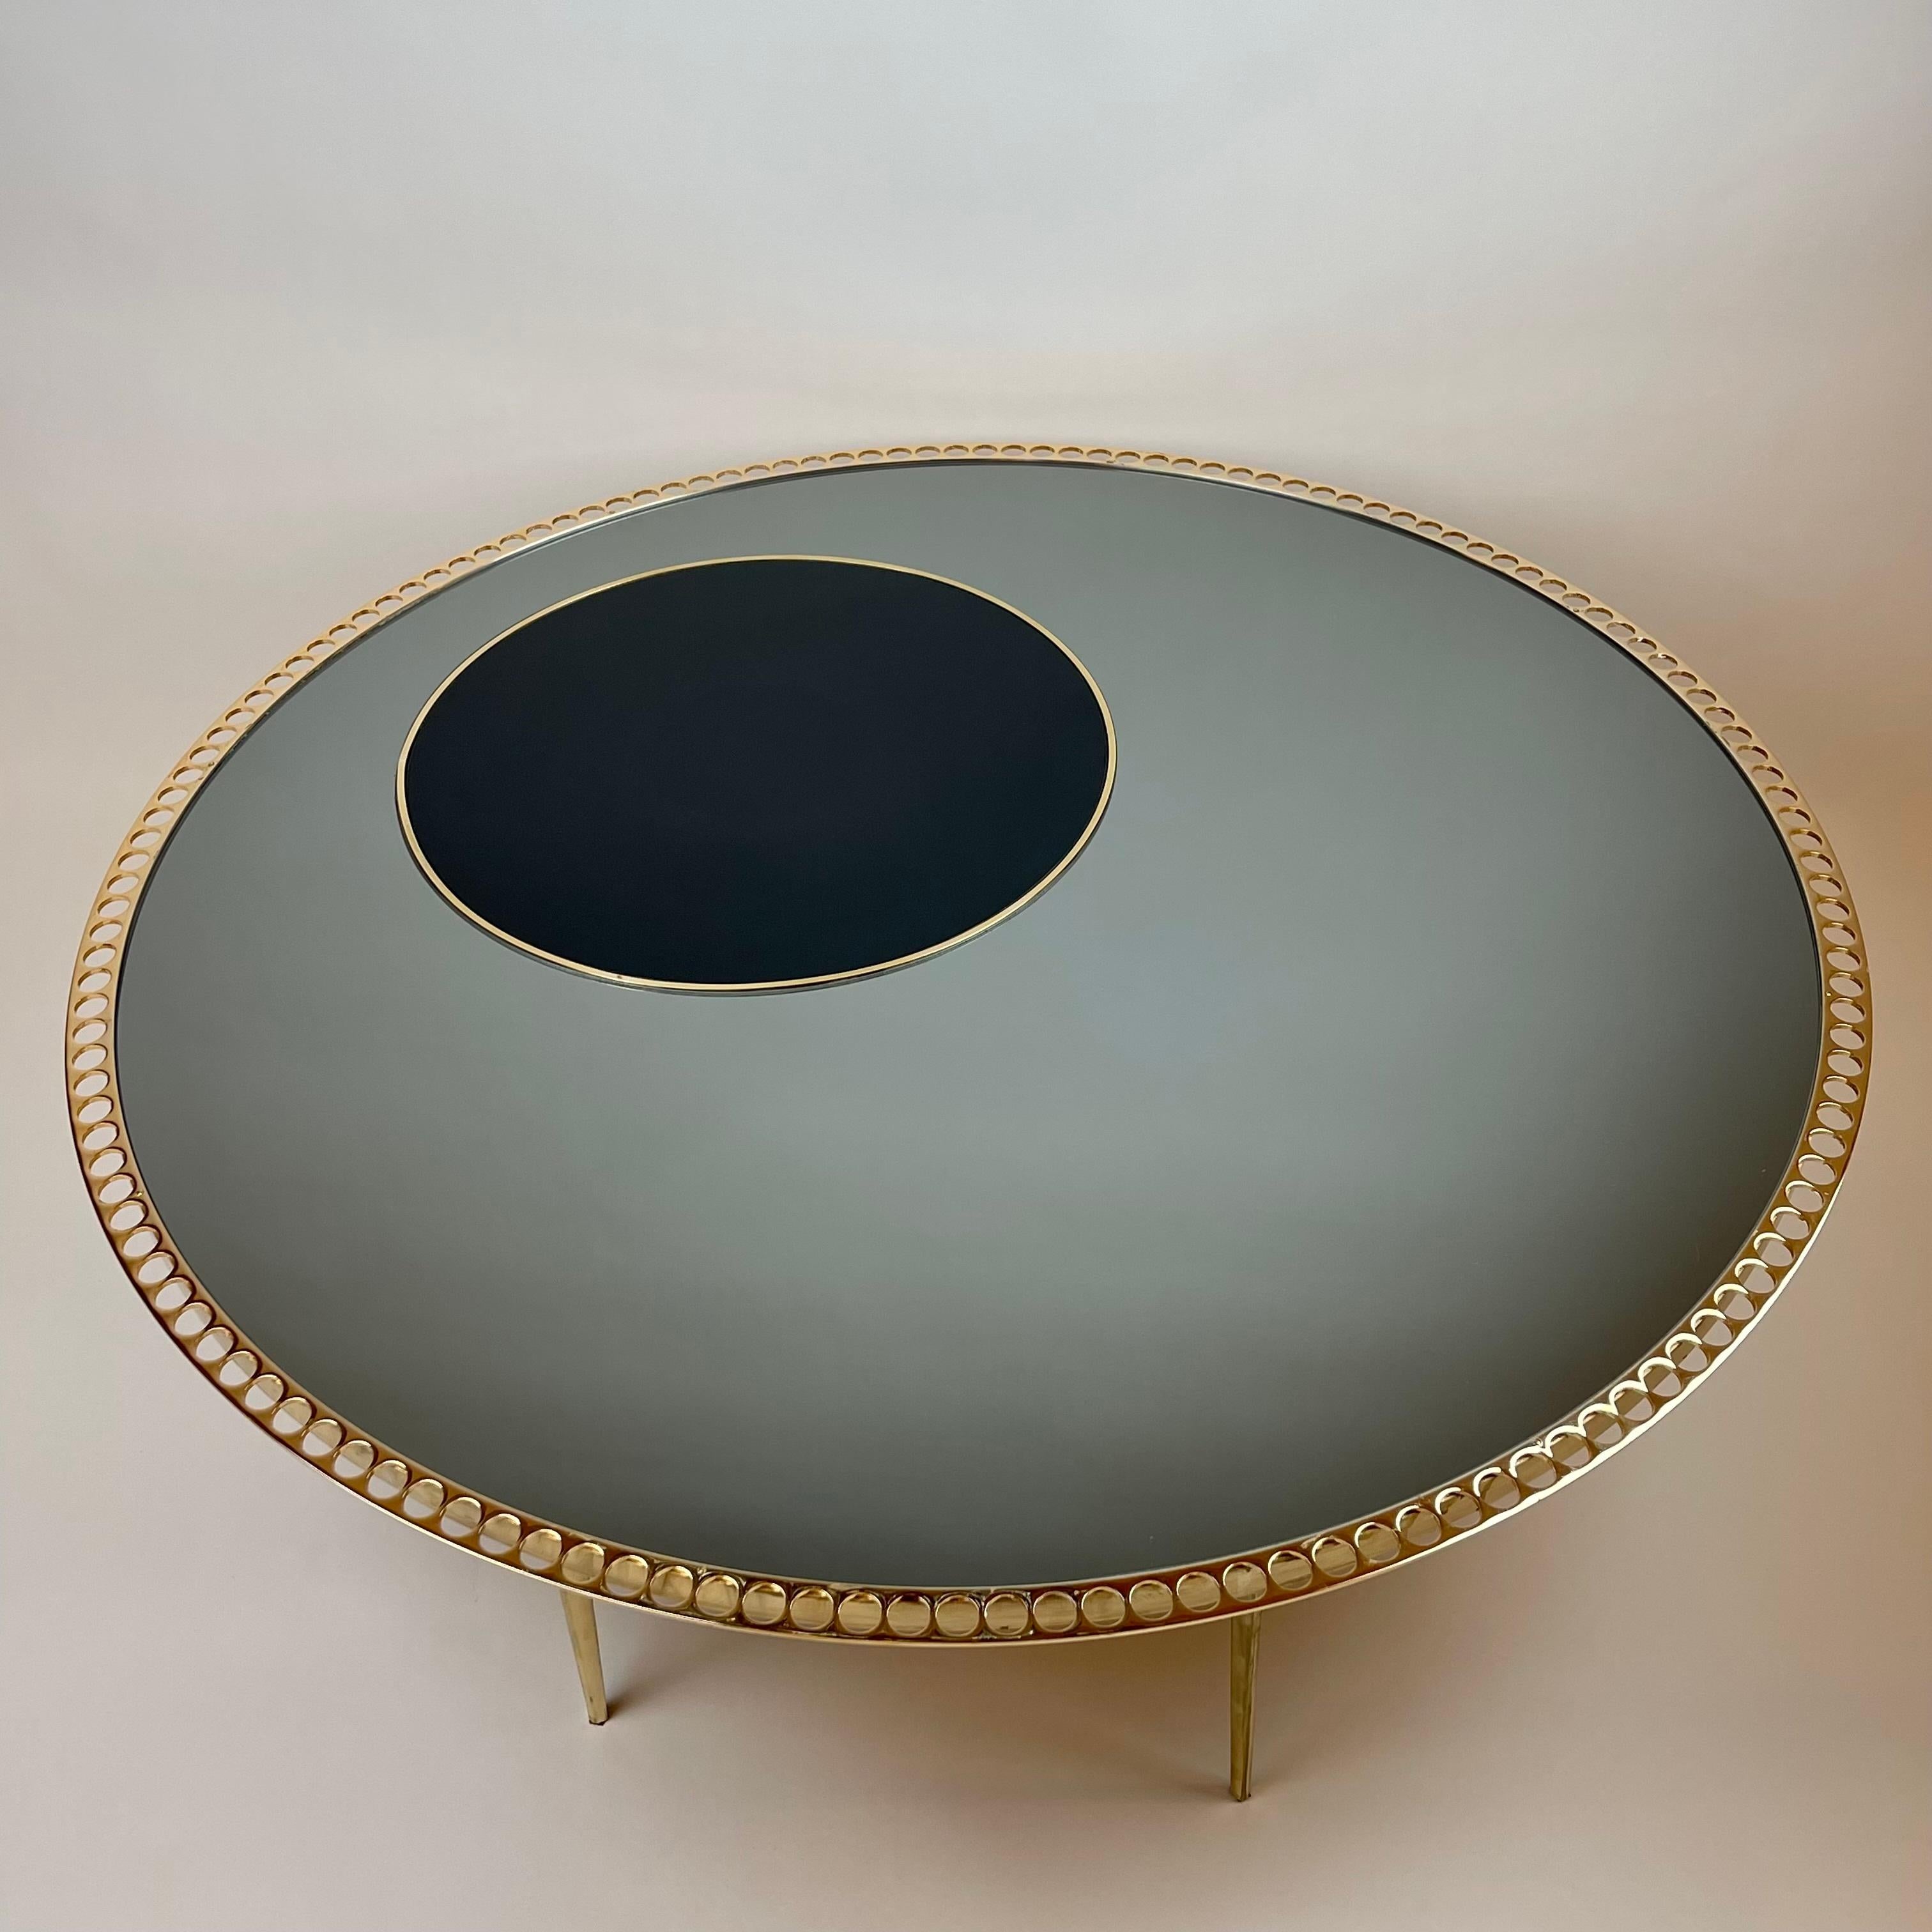 The coffee table has an insert of a black opaline glass dot of 50 diameter cm. on the top, morever it has six solid triangular brass legs & details. While the external holed metal ring of the coffee table is gilded to enhance contrast with the